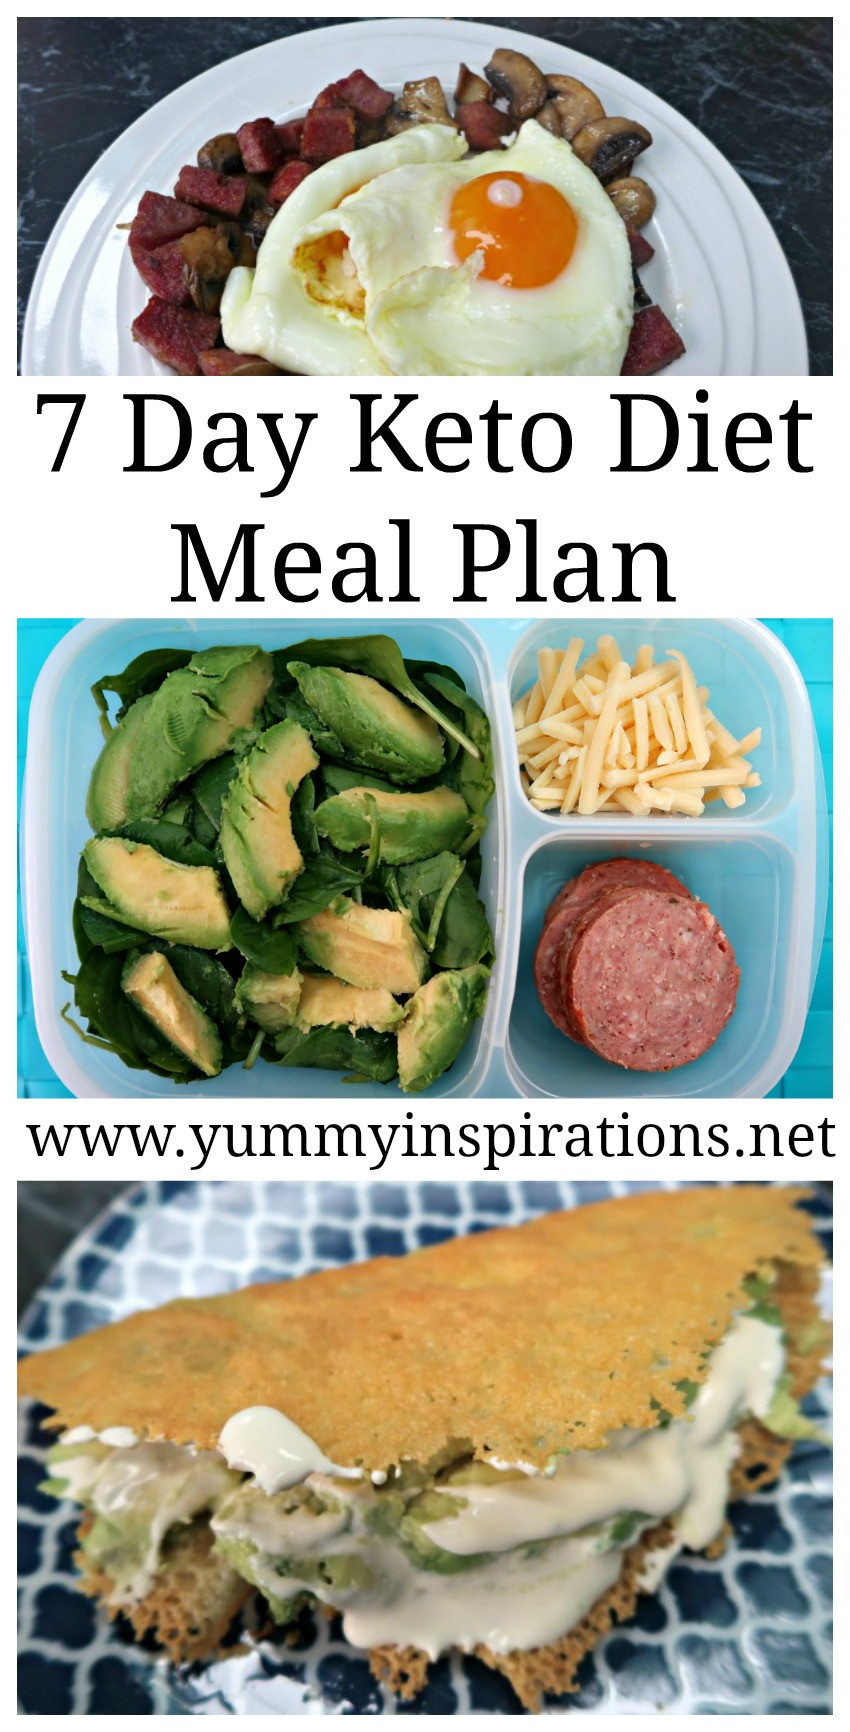 Quick Keto Diet Plan
 7 Day Keto Diet Meal Plan For Weight Loss Ketogenic Foods